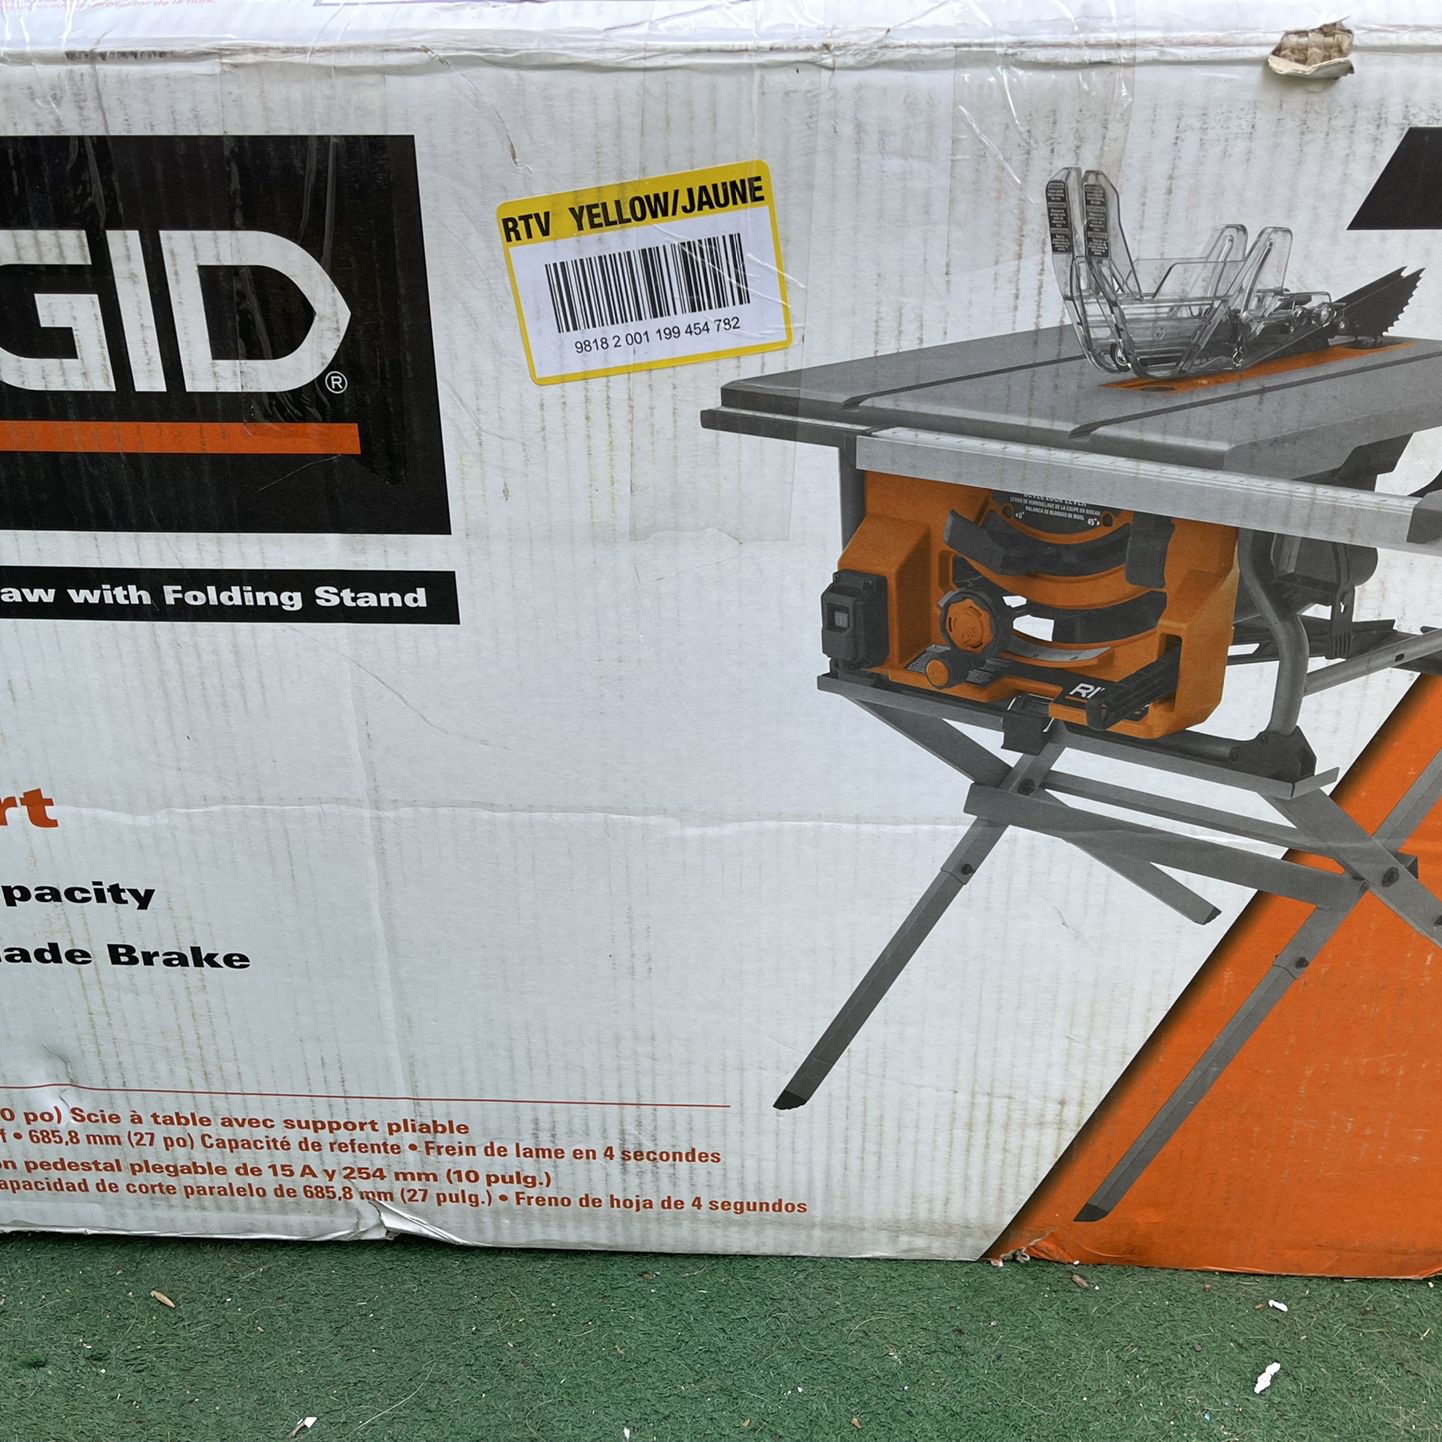 RIDGID 10 in. Table Saw with Folding Stand